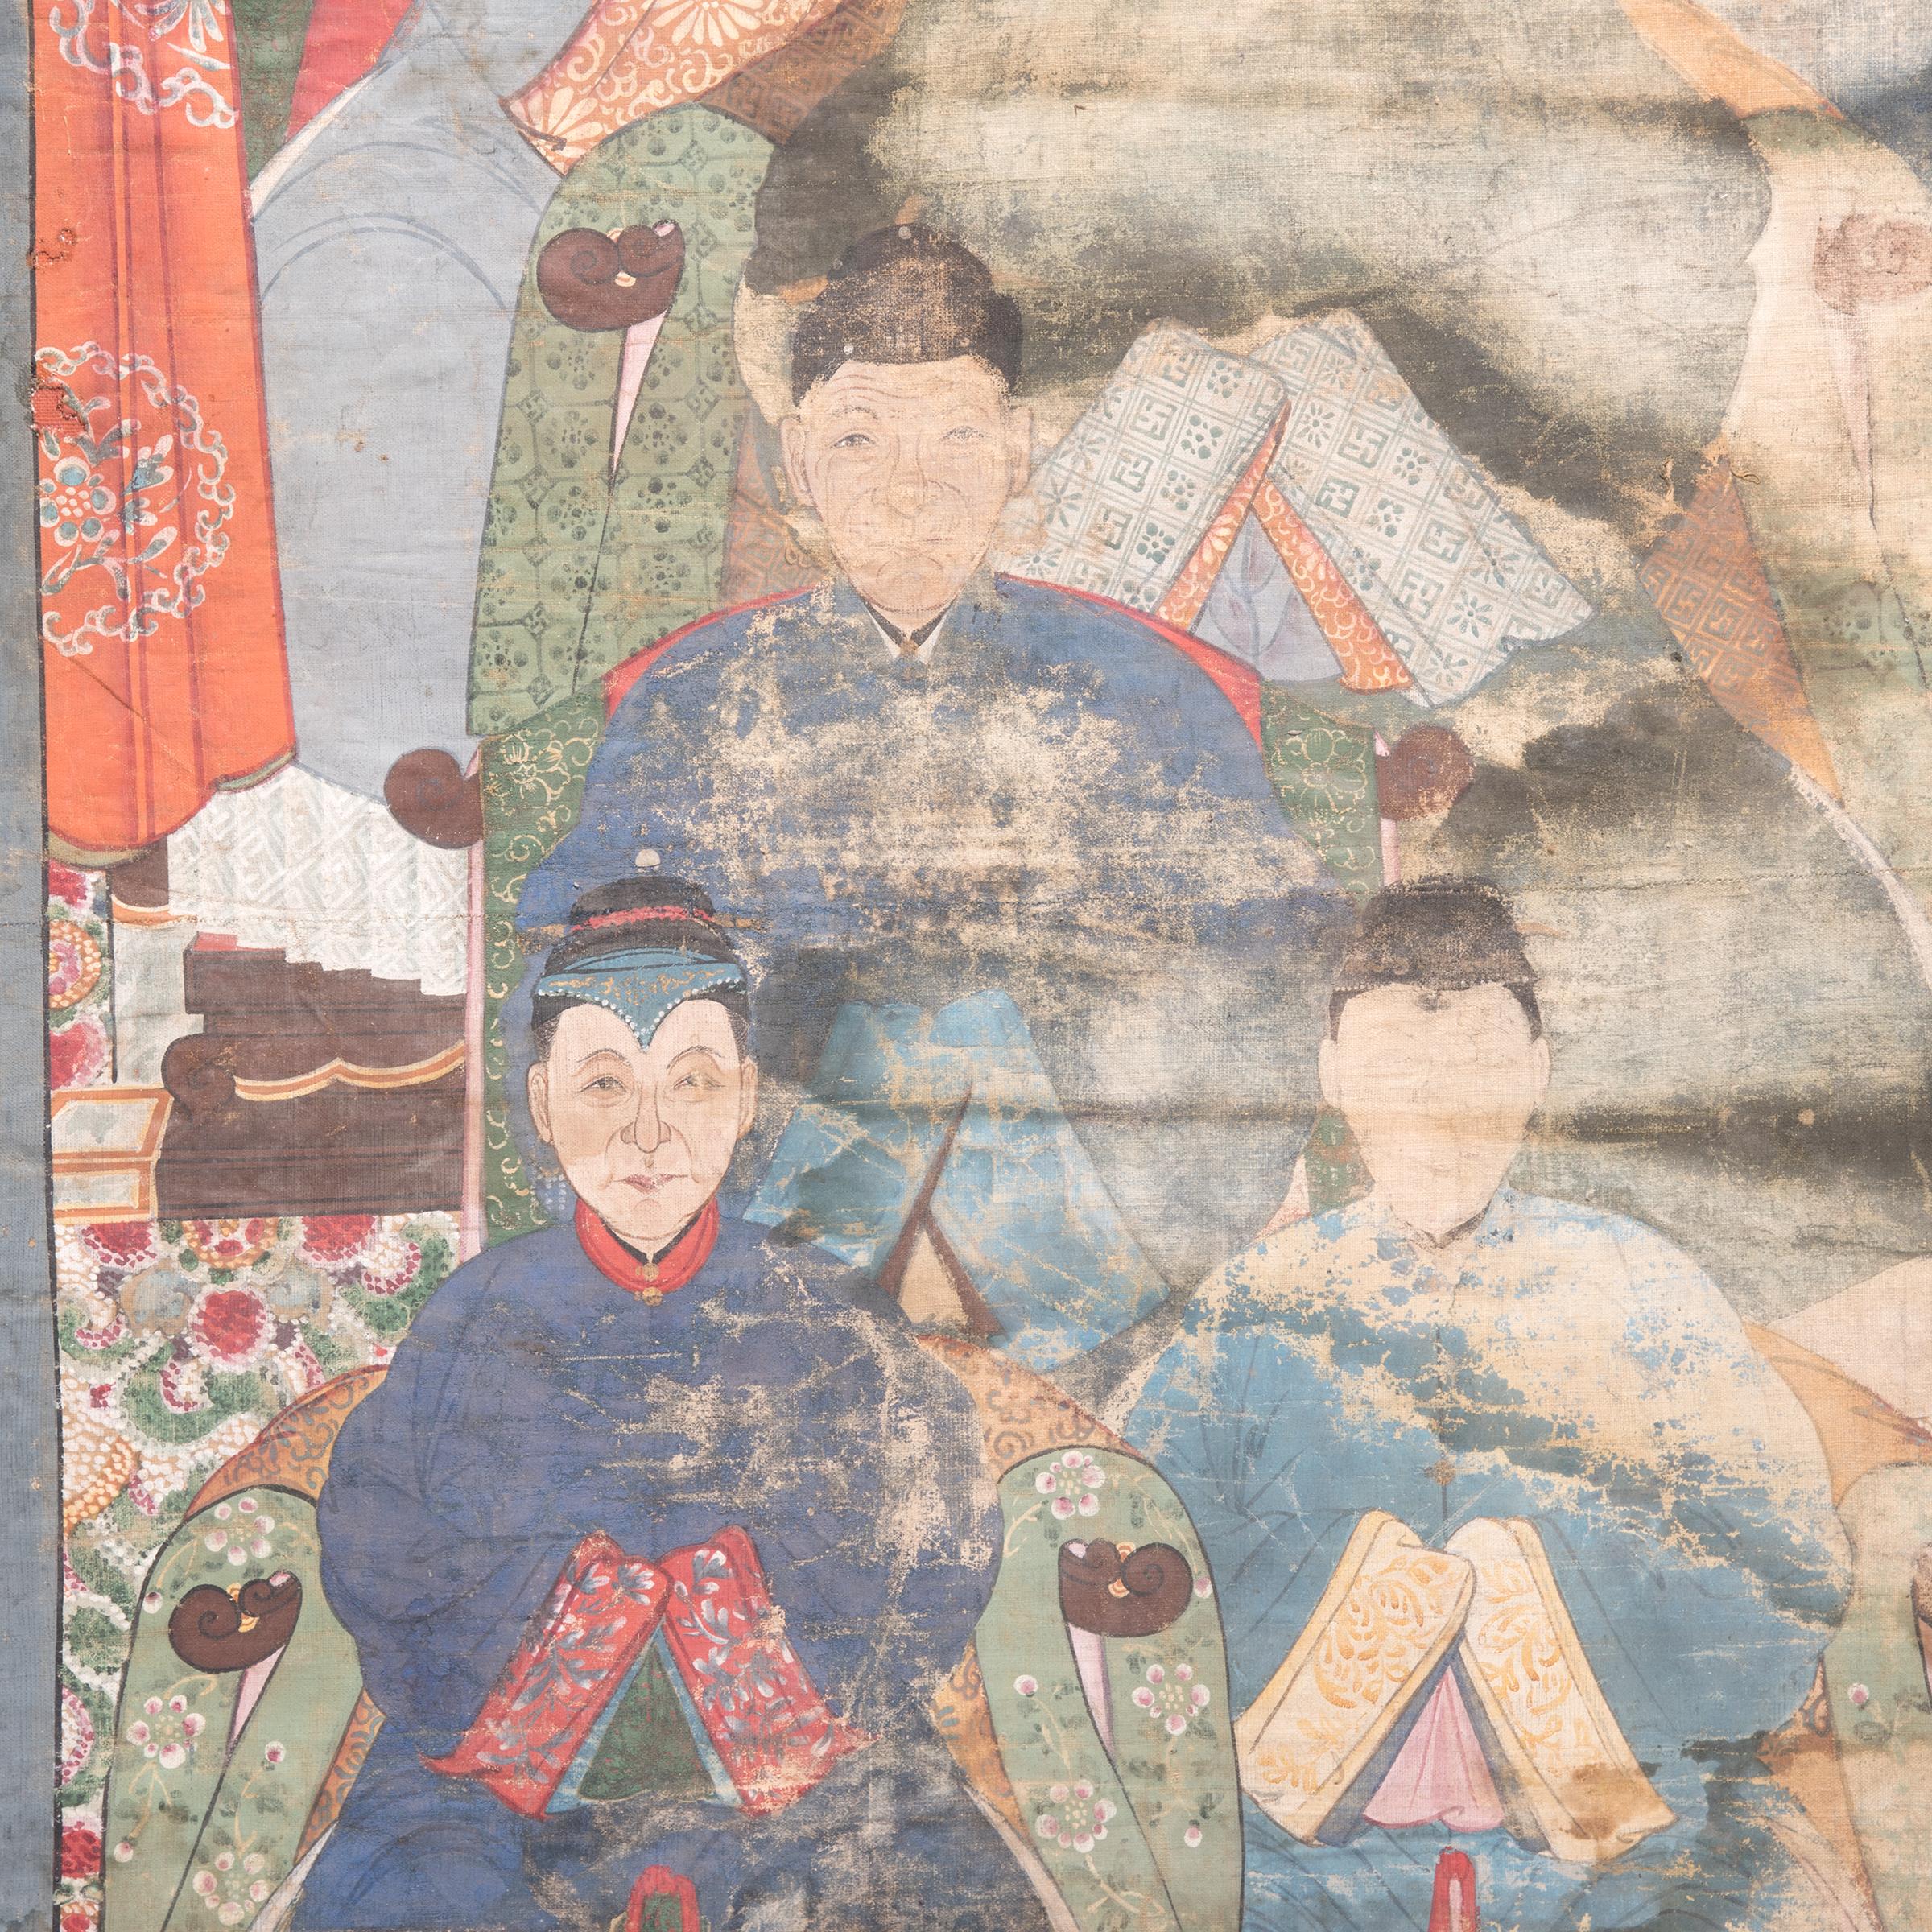 Reflecting the role that ancestor worship played in Chinese culture, this Qing-dynasty painting depicts several generations of family, dressed in intricately-detailed and brilliantly colored garments. The oldest ancestors are largest in scale at the